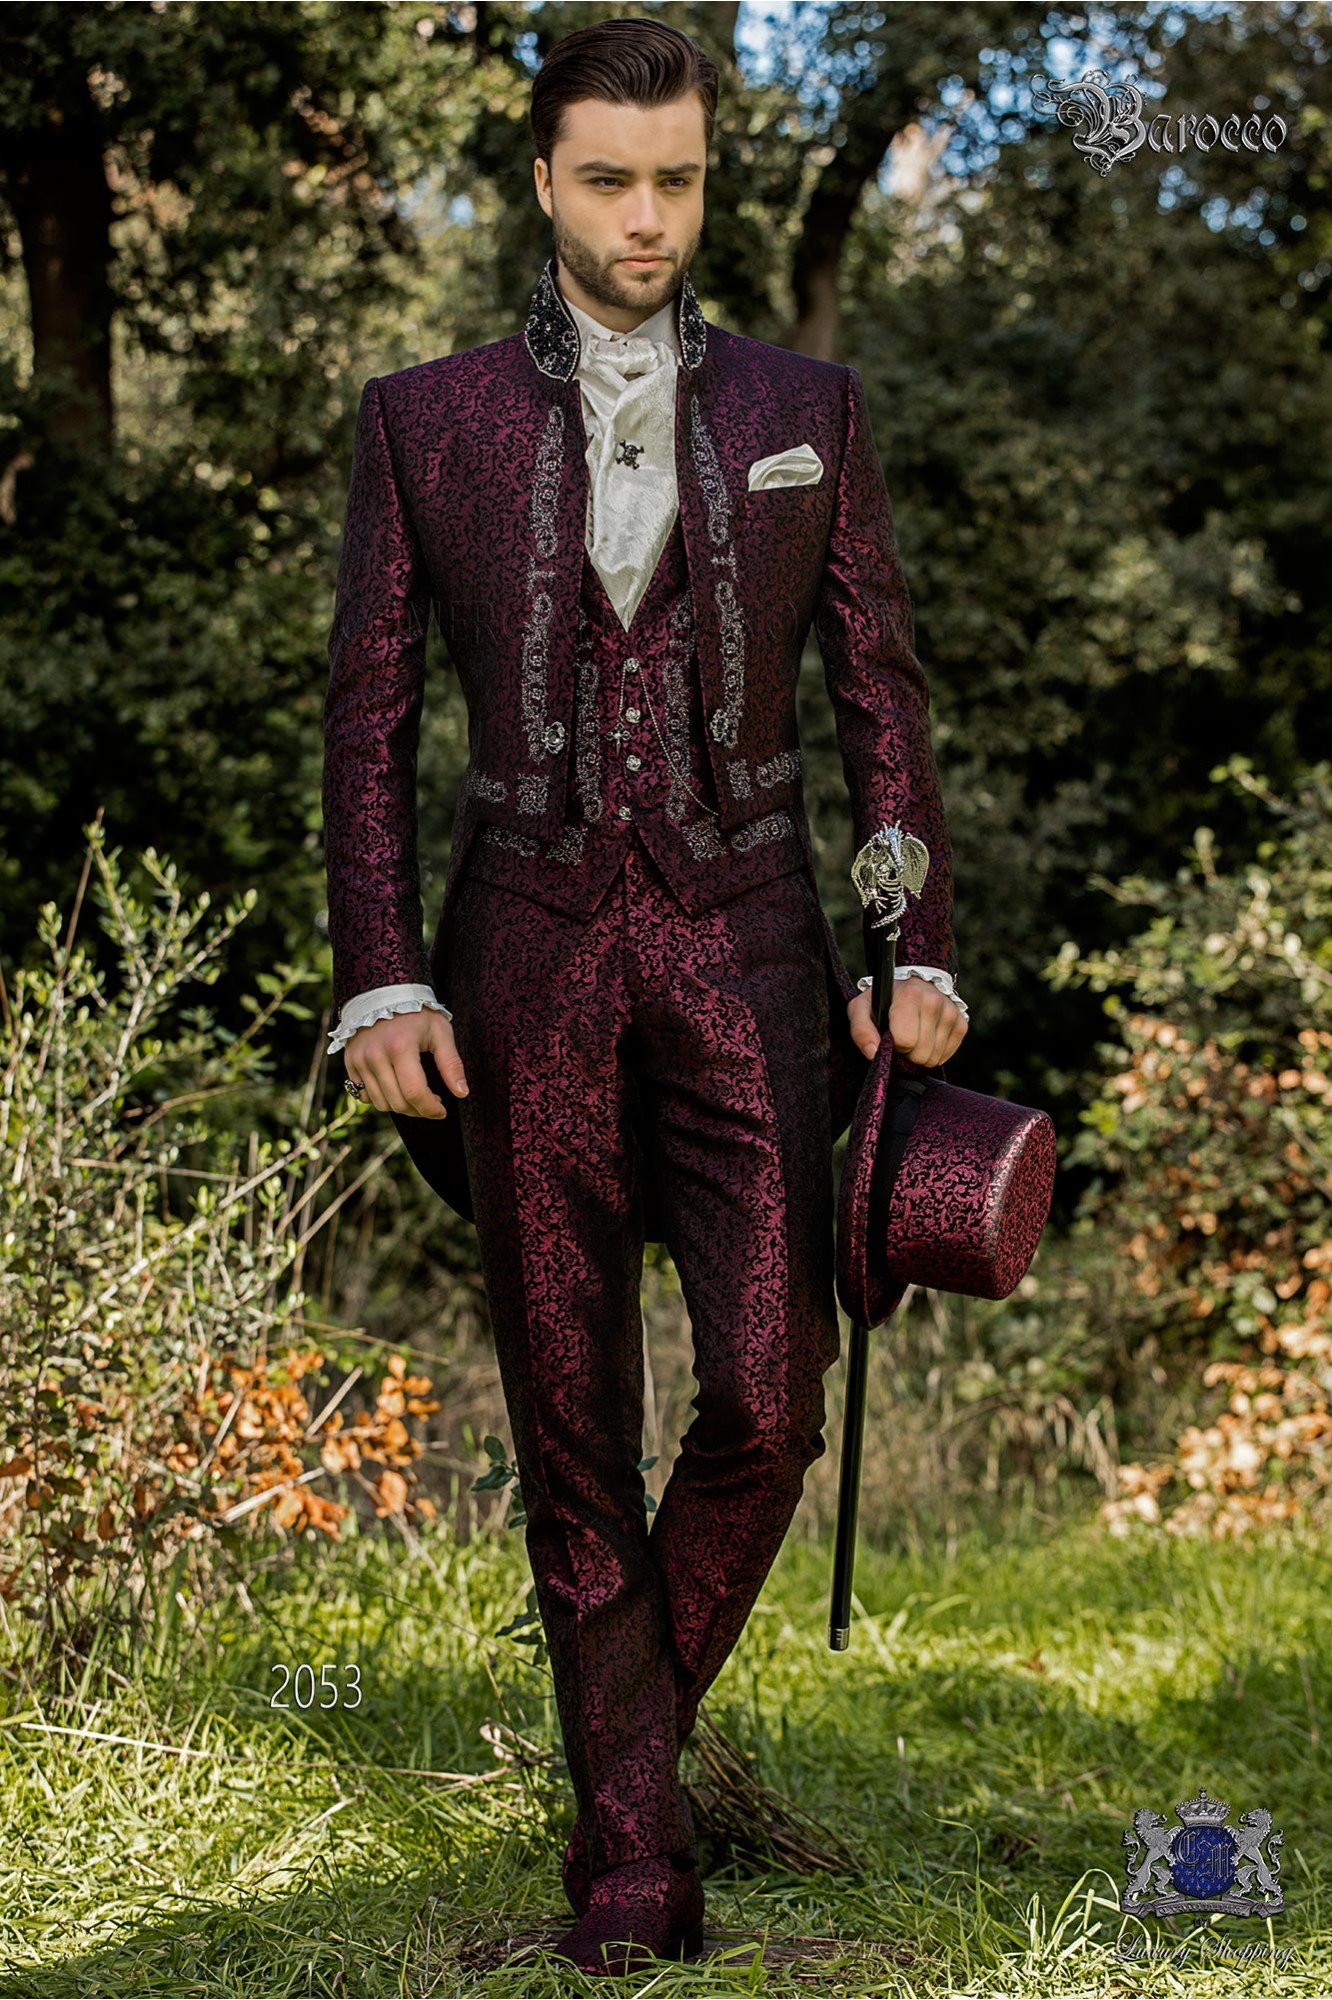 Baroque purple jacquard tailcoat with silver embroidery, crystal rhinestones on Mao collar and crystal brooch model 2053 Mario Moyano